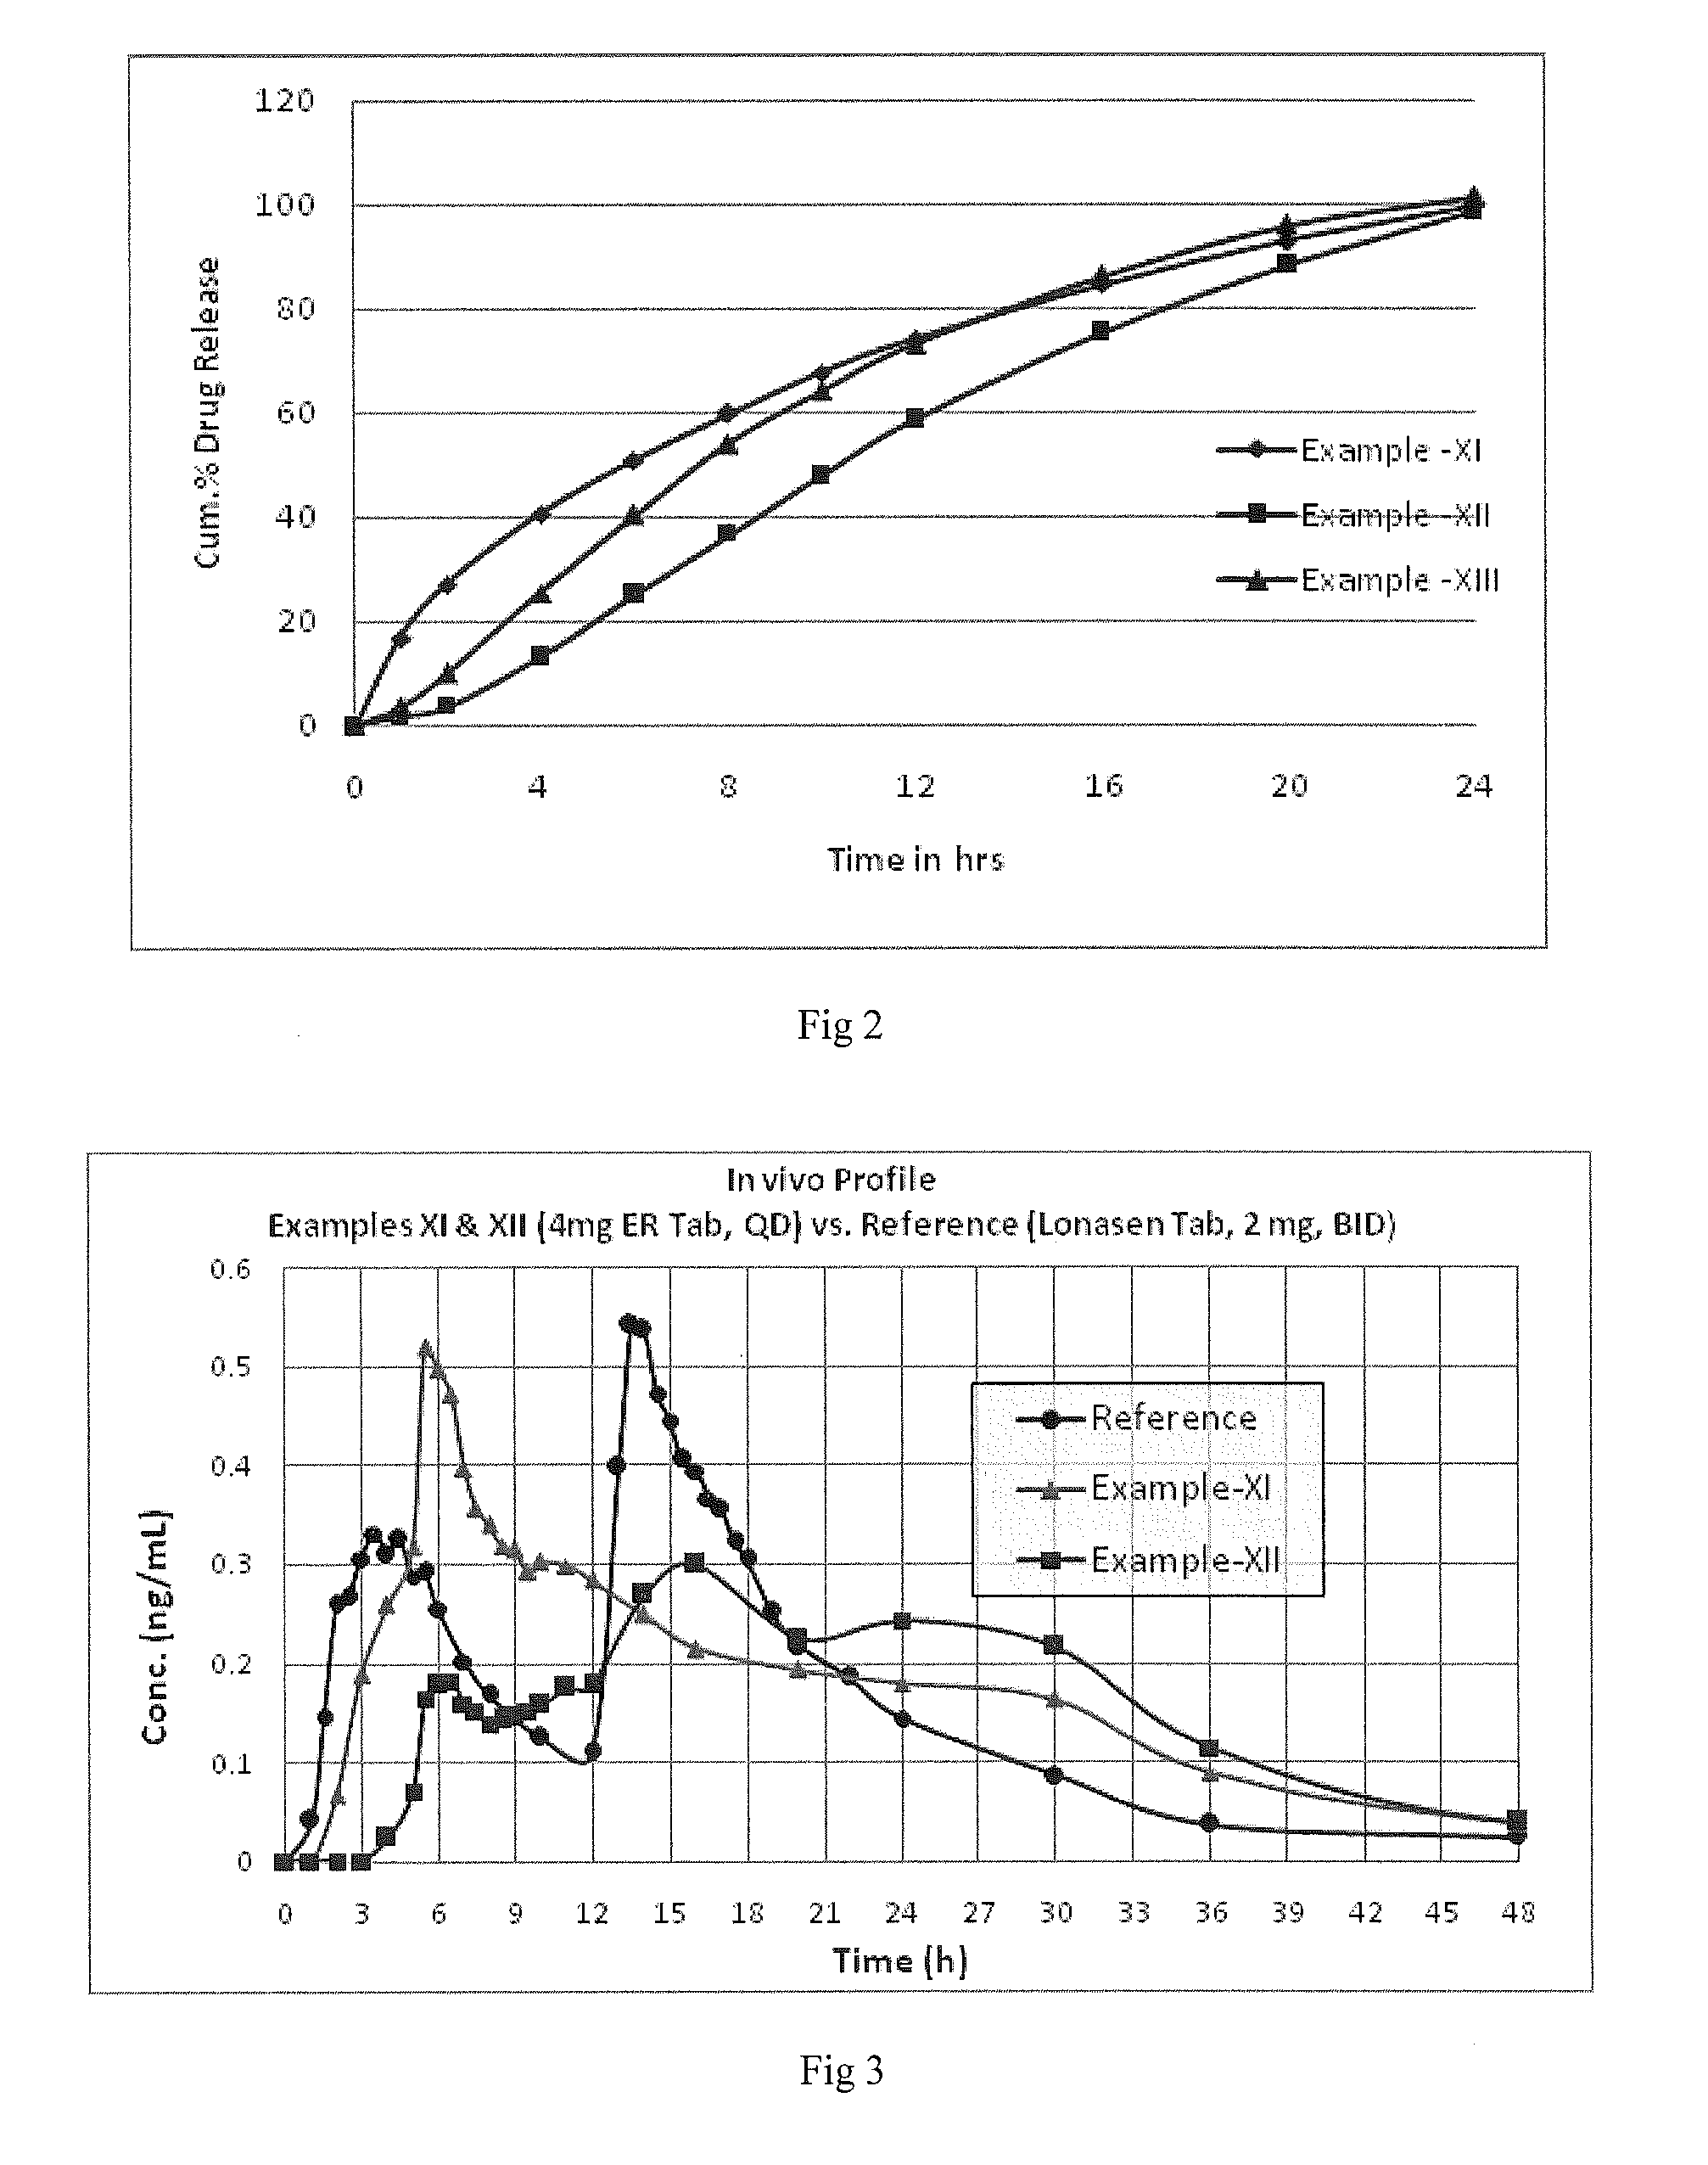 Oral controlled release pharmaceutical compositions of blonanserin